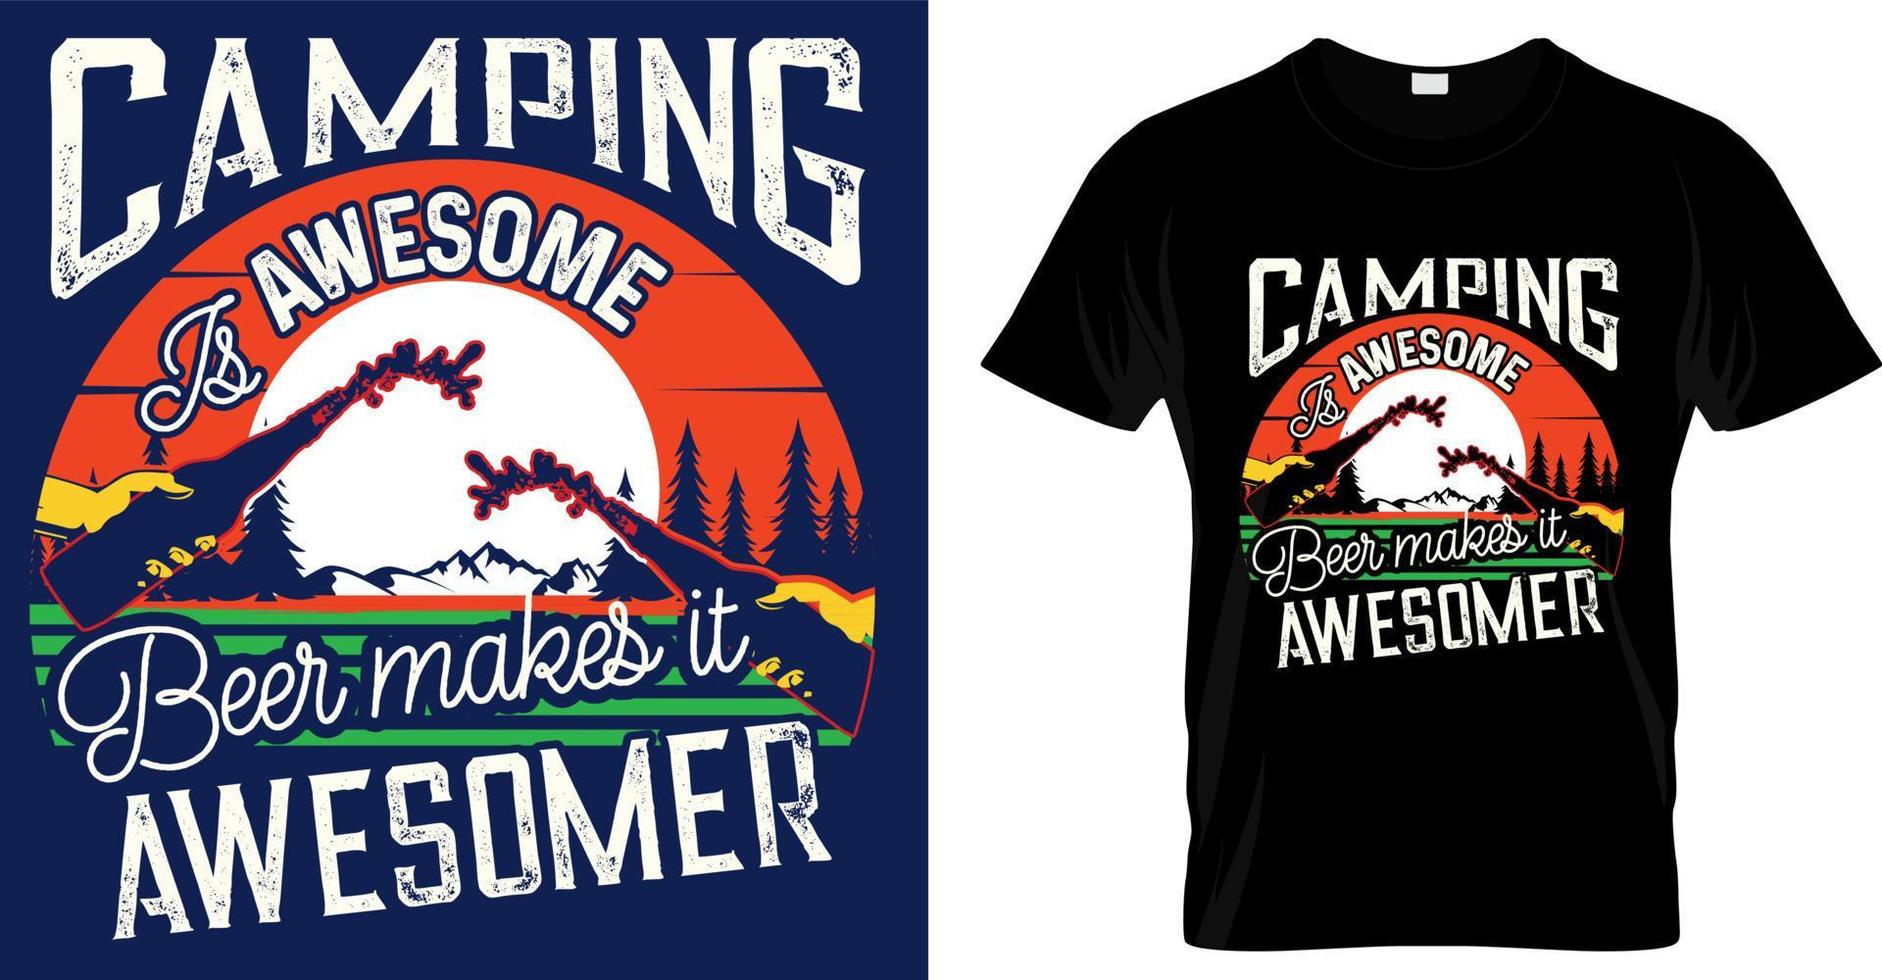 Camping, hiking, outdoor adventure graphic vector illustration funny typography slogan text for t shirt design, prints, poster. Summer travel badge saying,  camping is awesome beer makes it awesomer